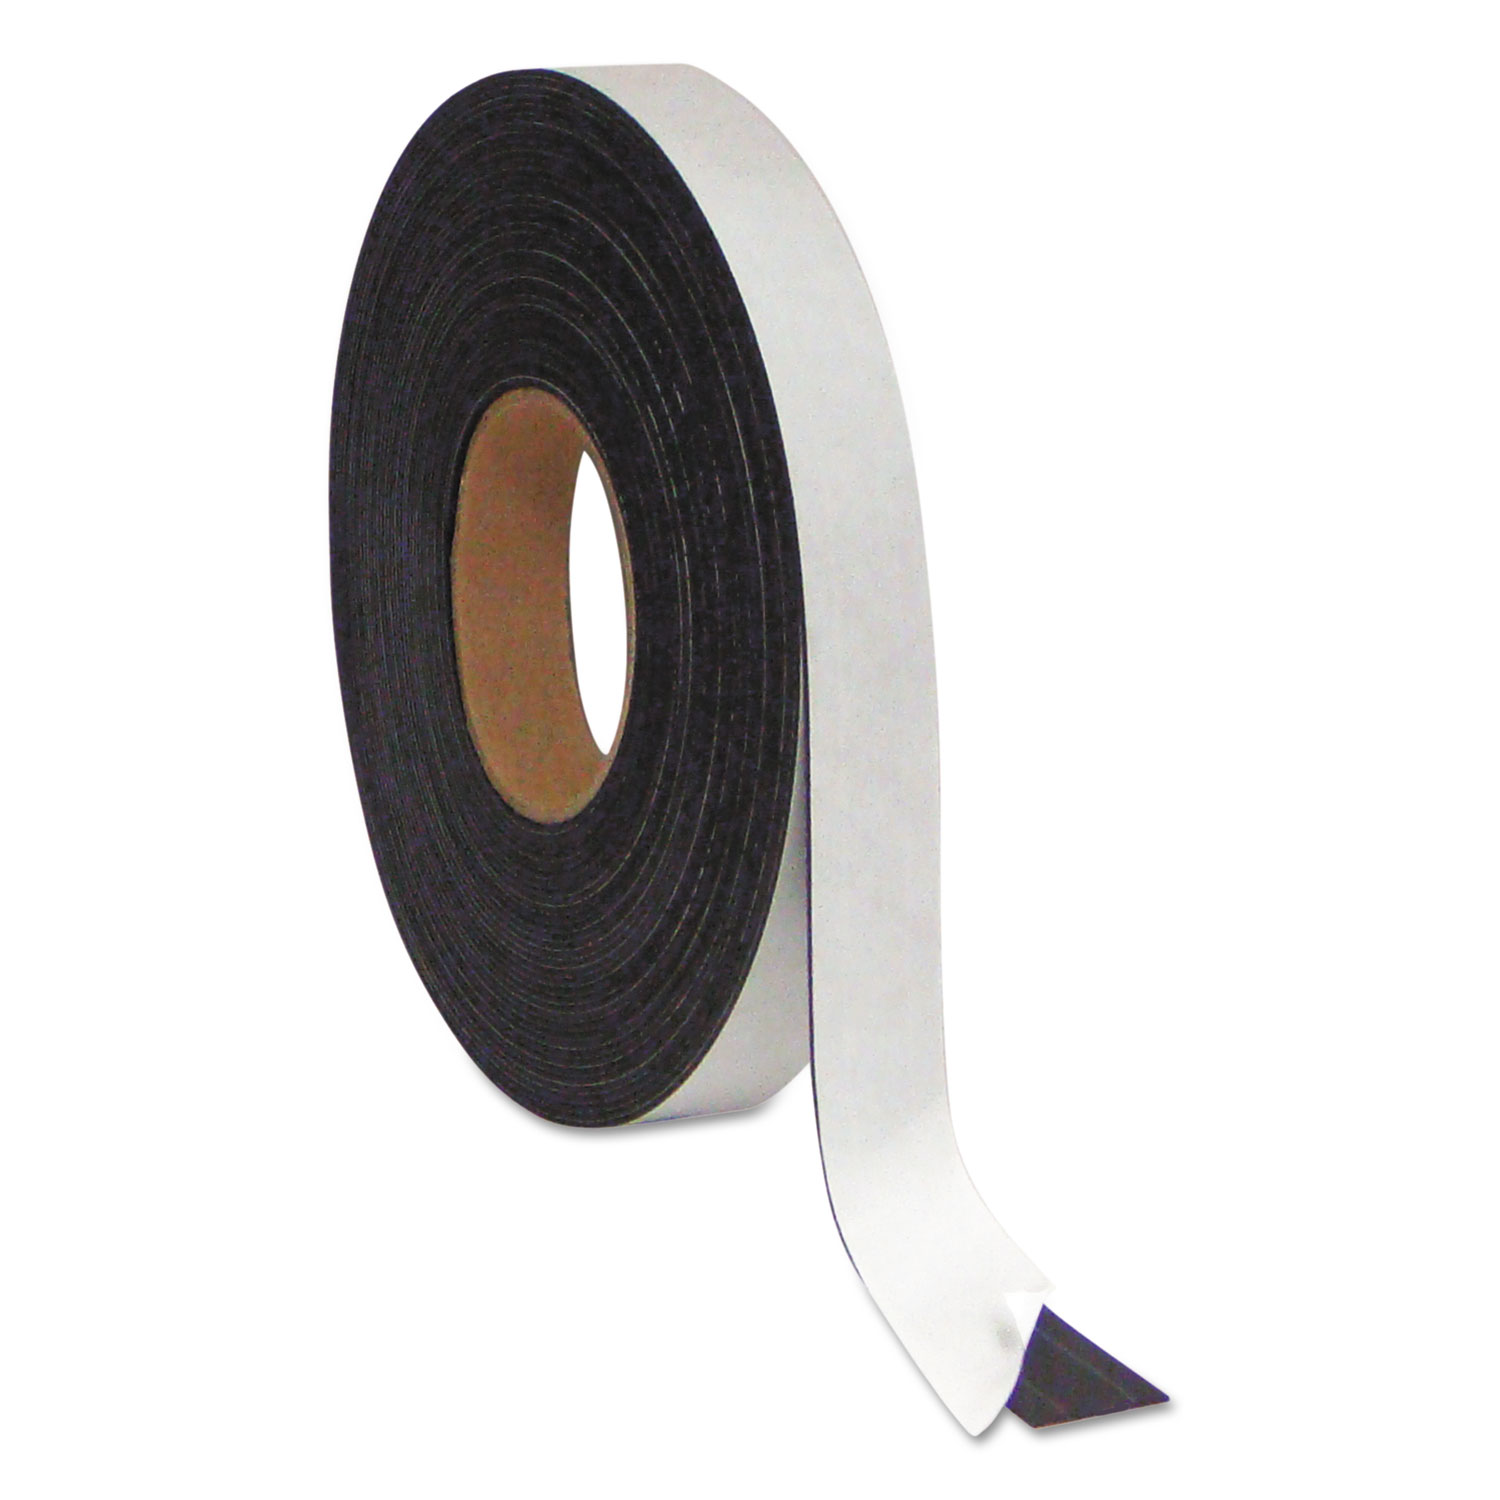  MasterVision FM2321 Magnetic Adhesive Tape Roll, 1/2 x 50 Ft., Black (BVCFM2321) 